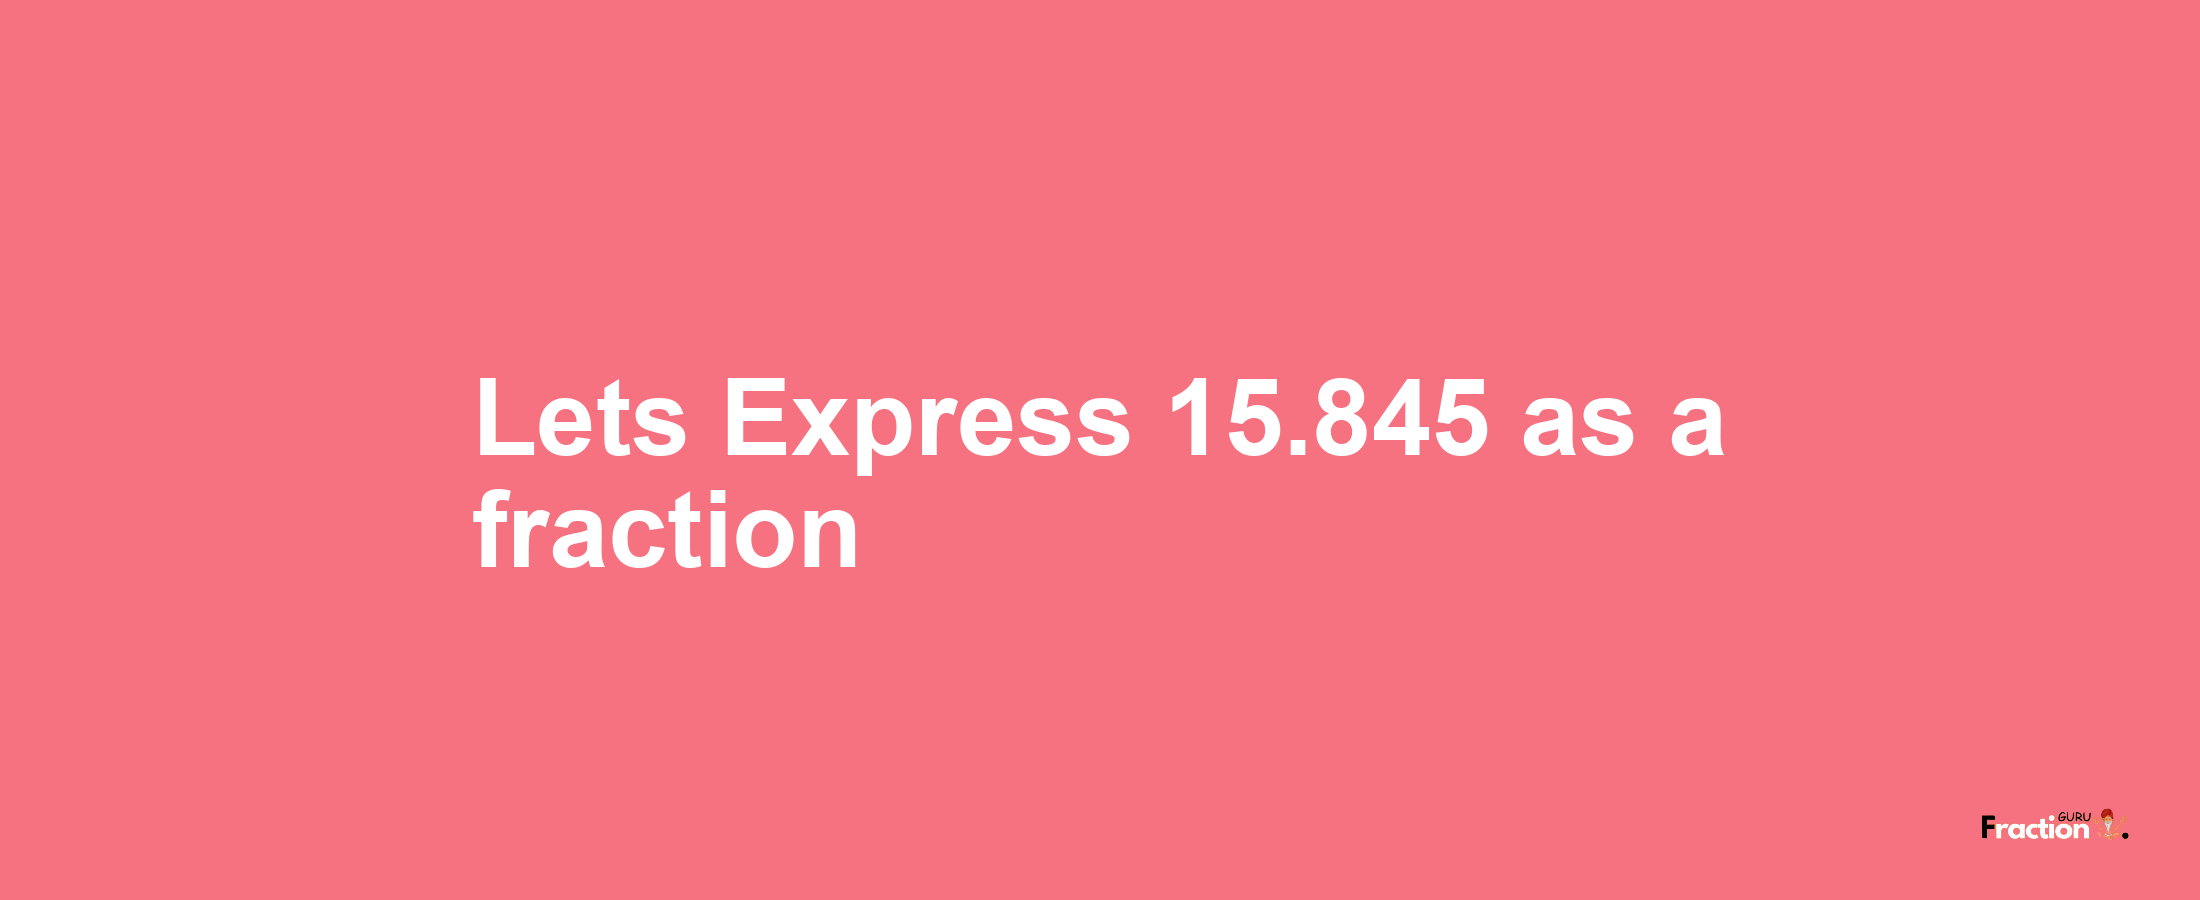 Lets Express 15.845 as afraction